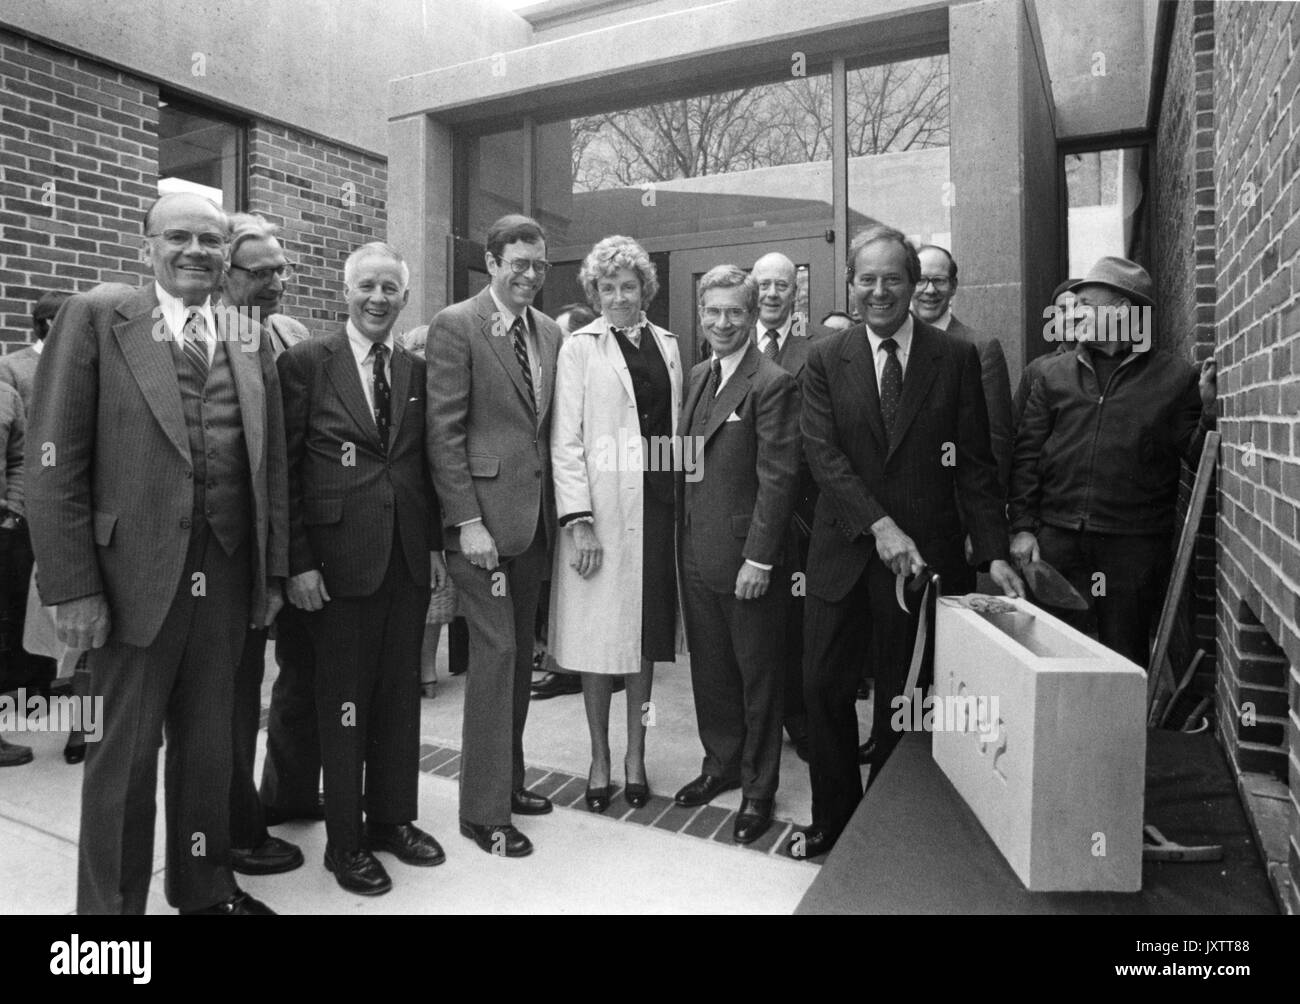 Olin Hall, Carl Finley Christ, Robert Dixon Hopkins Harvey, George Wescott Fisher, Harry Pinkard, Owen Phillips, Steven Muller, Group photograph taken at the dedication and cornerstone laying ceremony for Olin Hall, 1982. Stock Photo